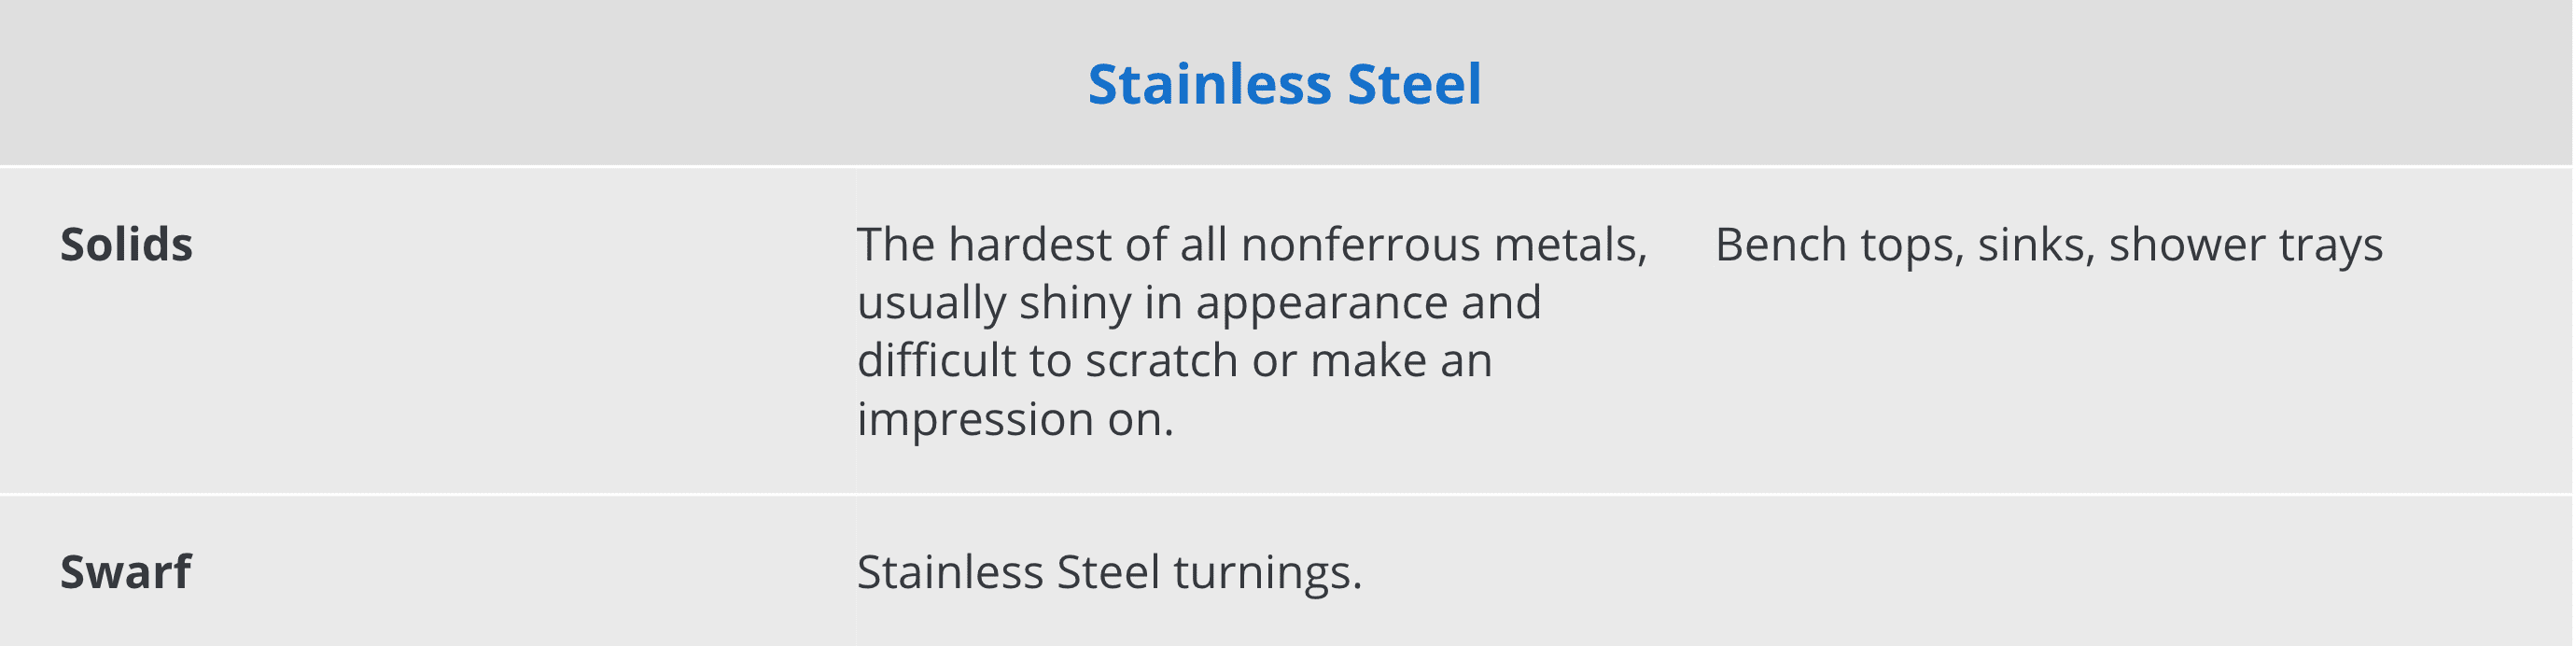 stainless-steel-information